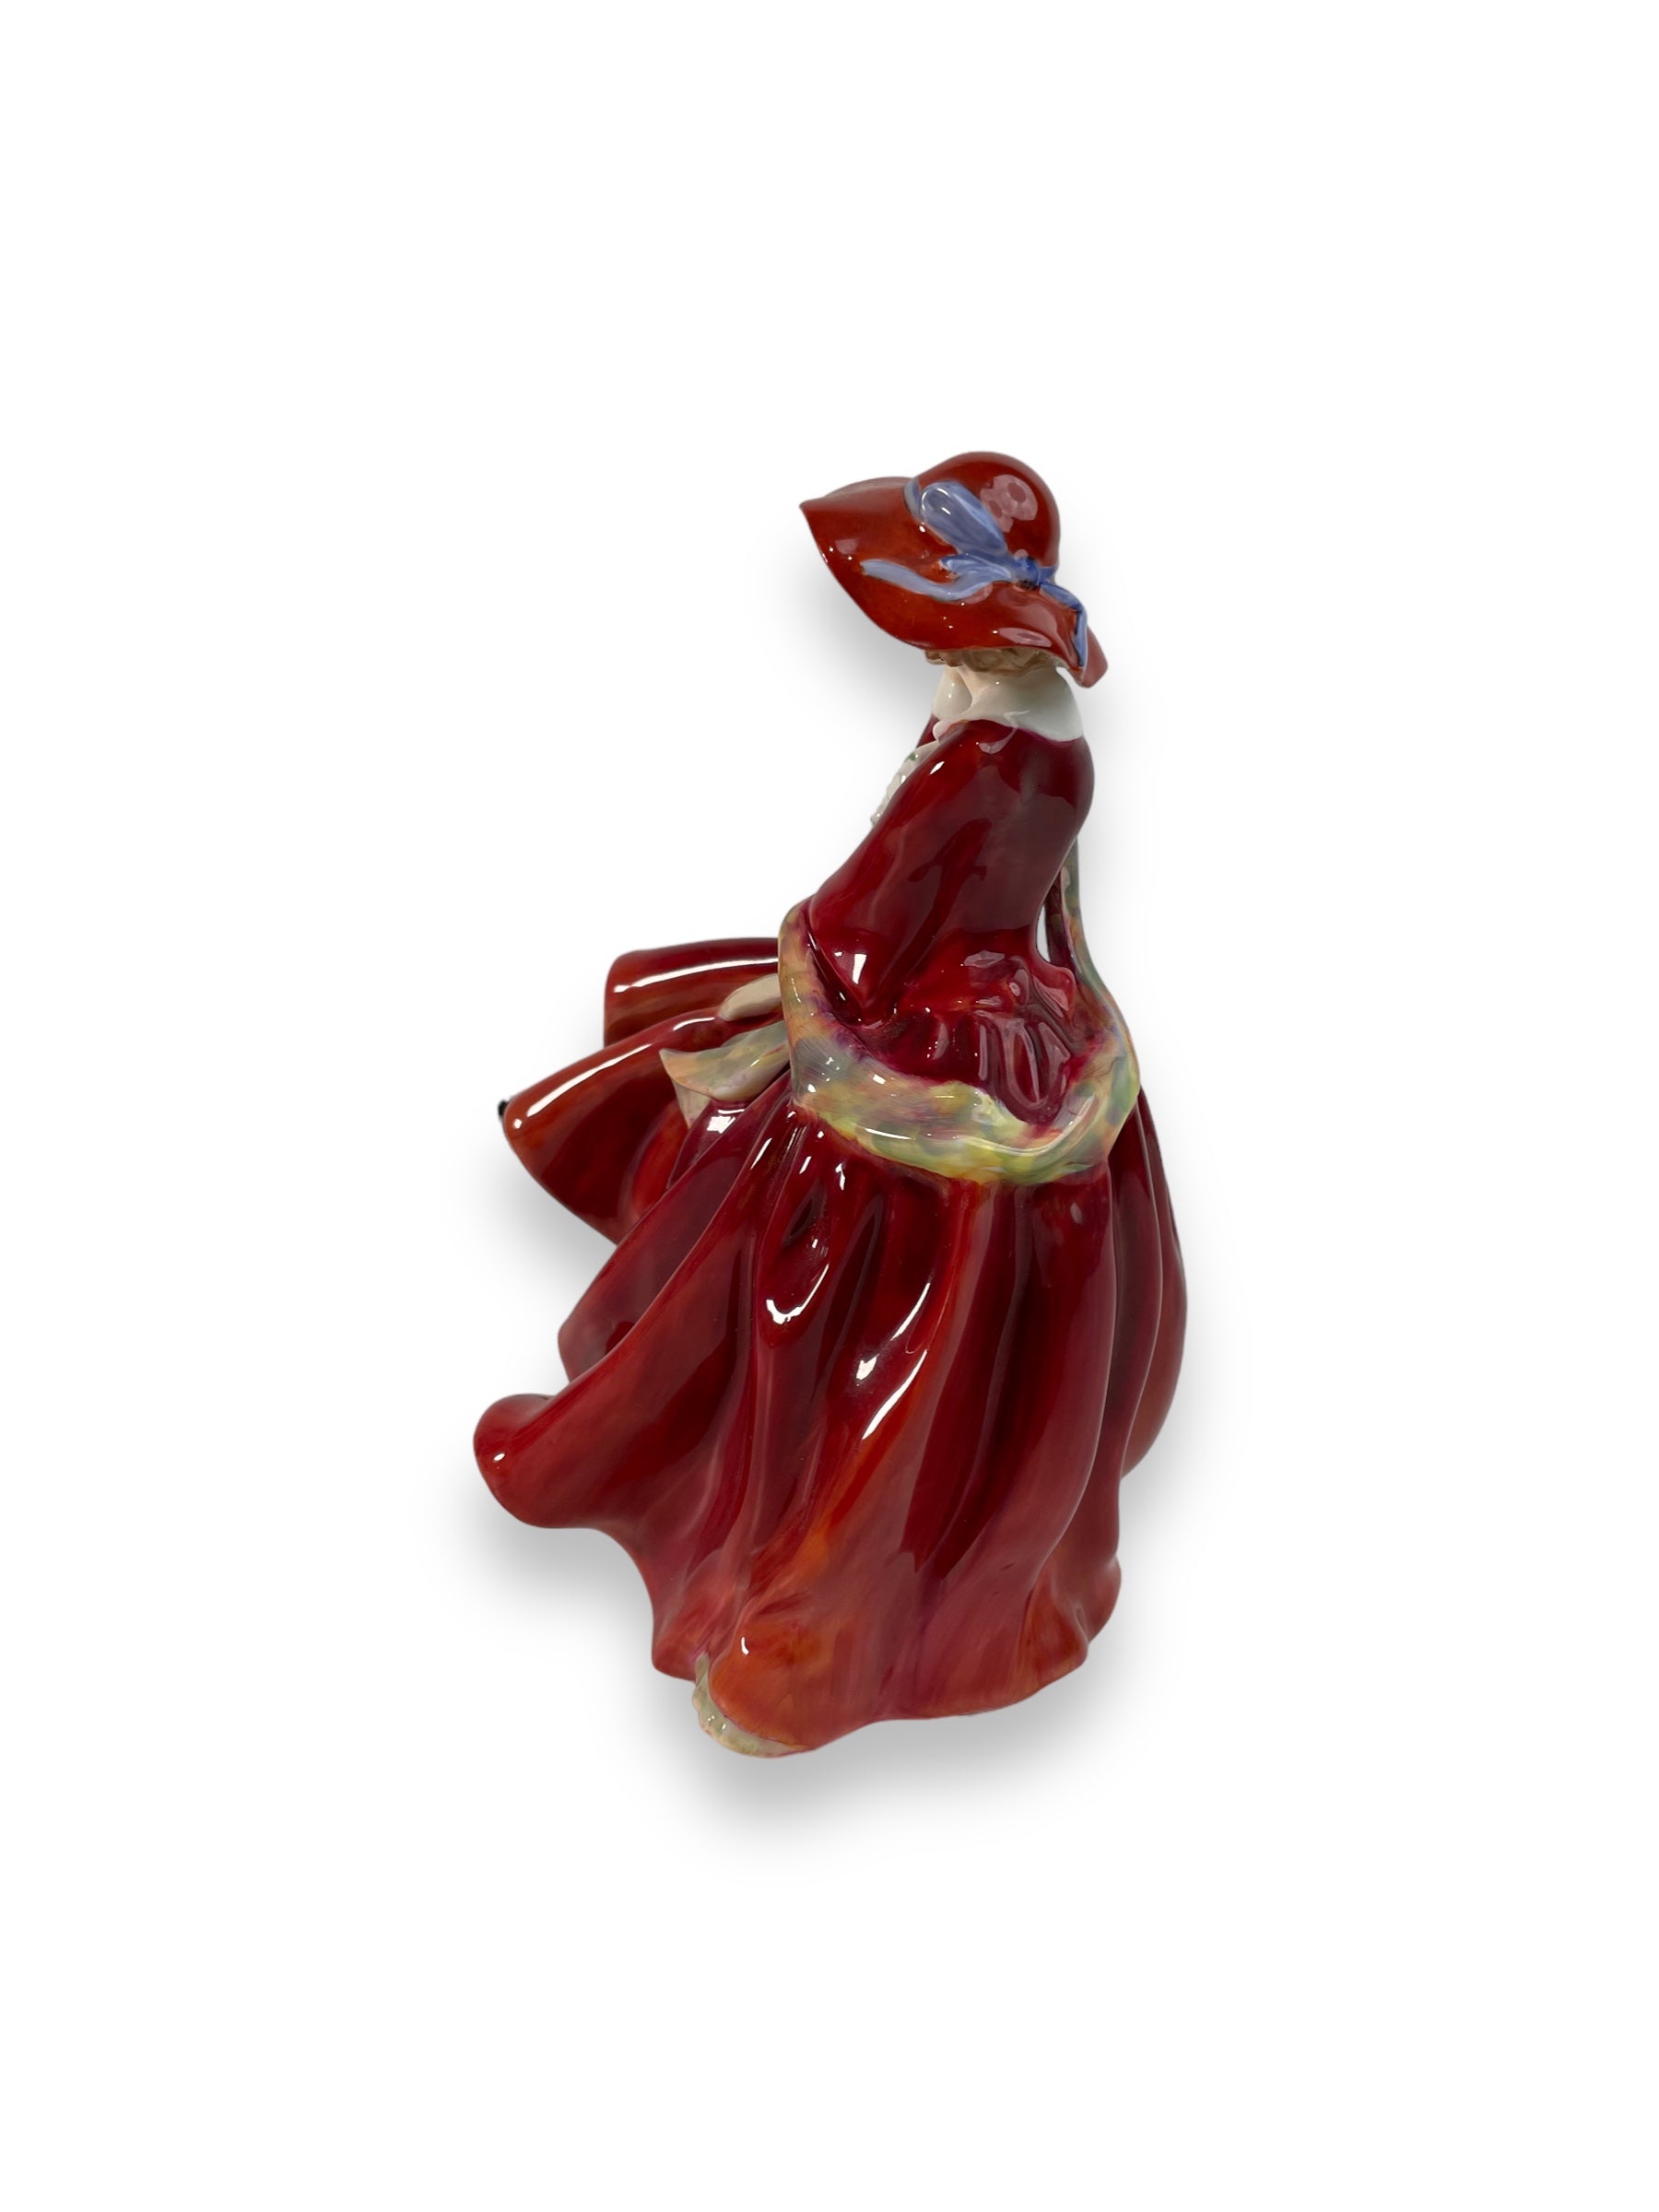 Royal Doulton "Top O' the Hill" Figurine